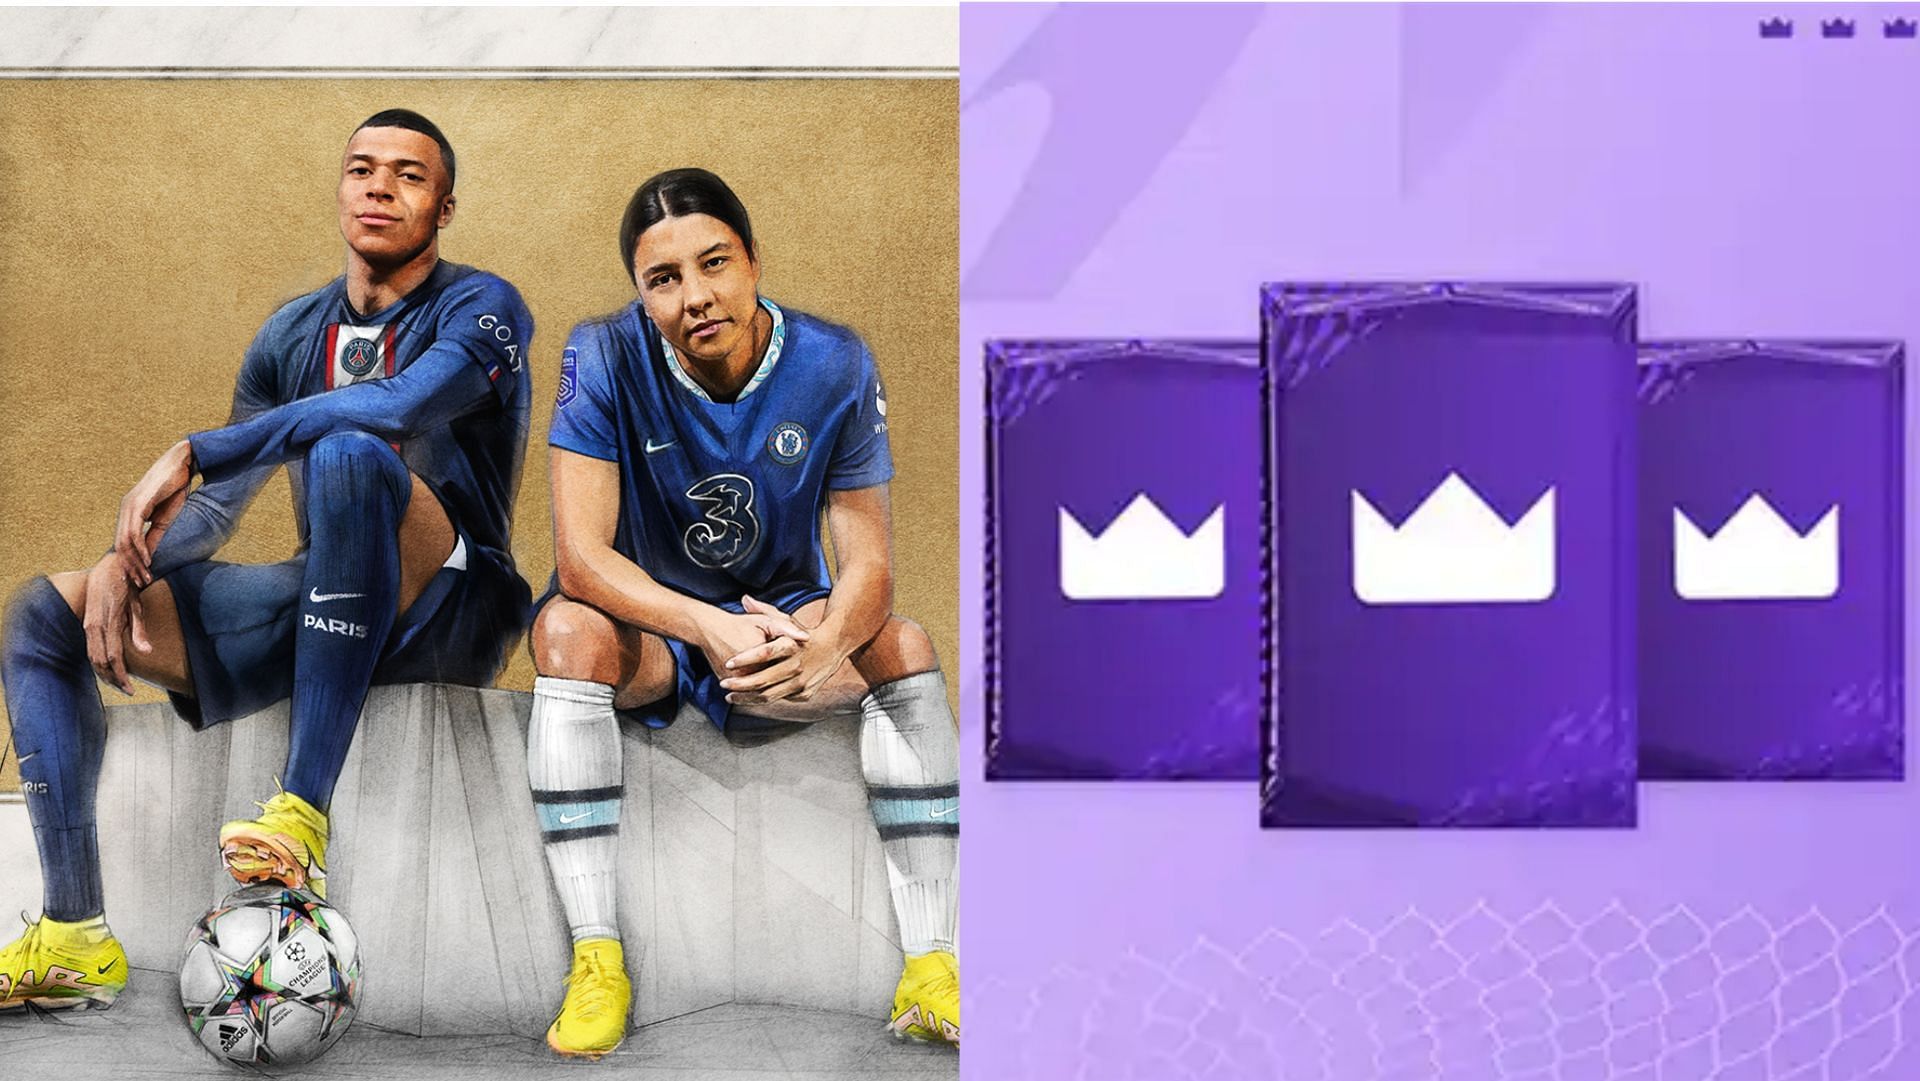 FIFA 23 Prime Gaming: how to claim rewards pack on